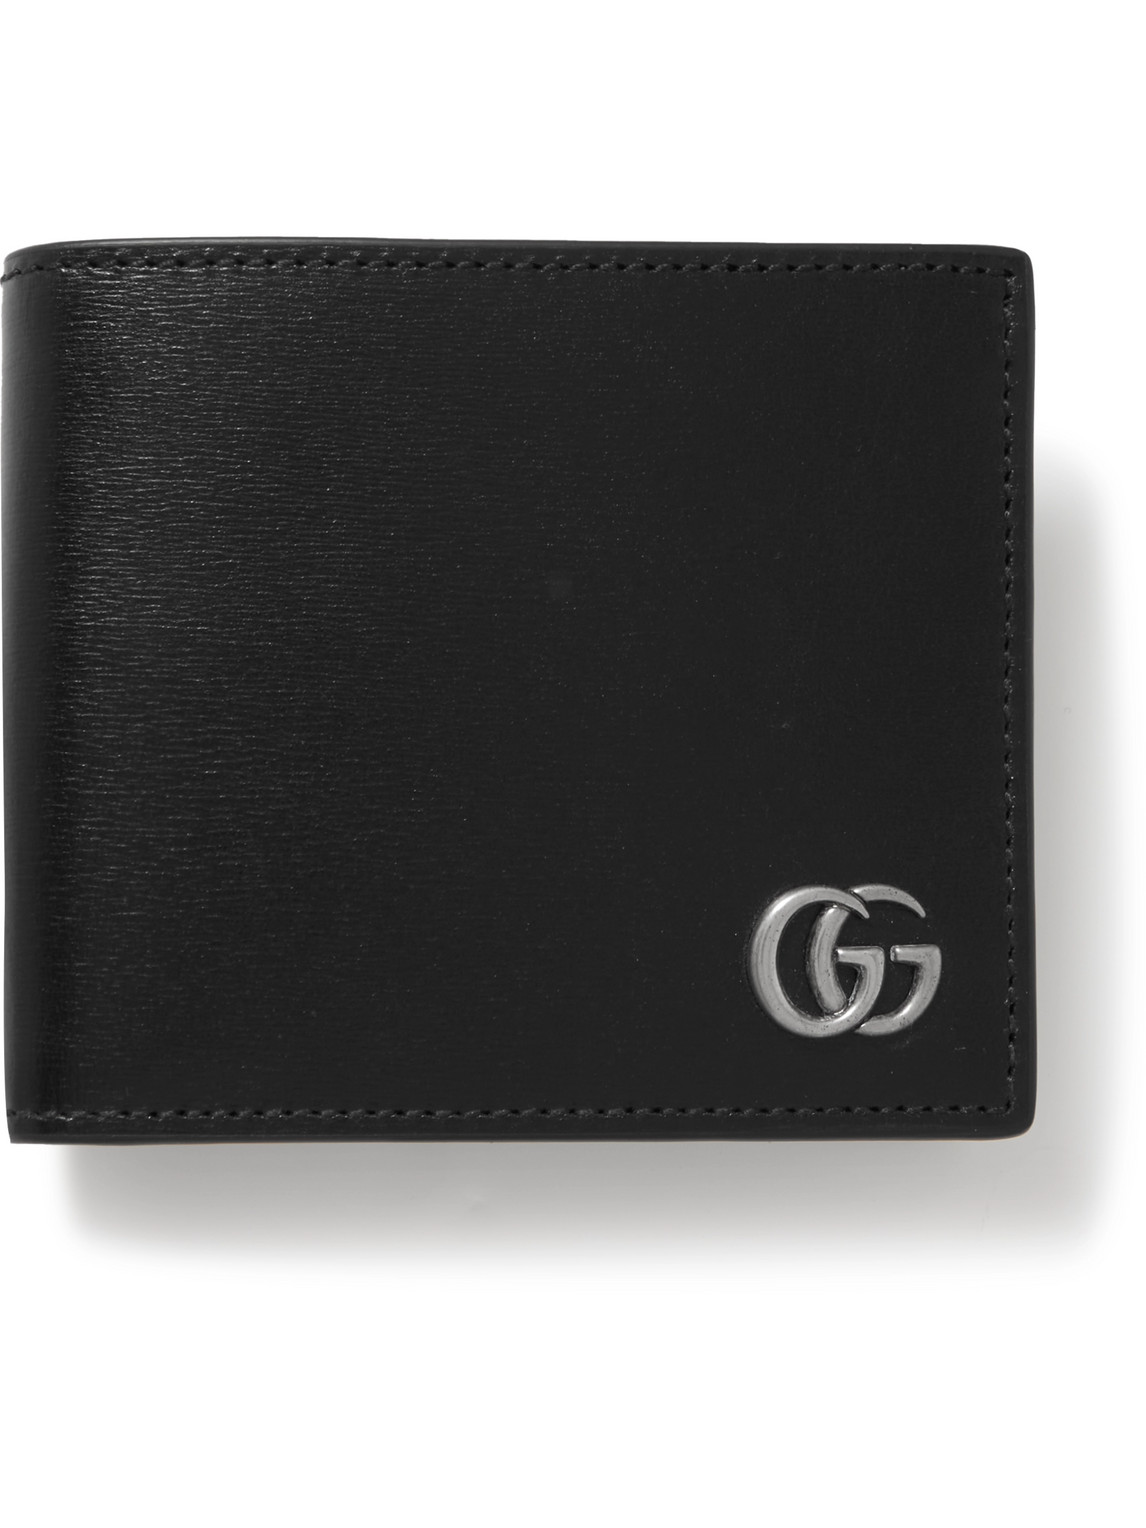 GG Marmont Leather Billfold Wallet